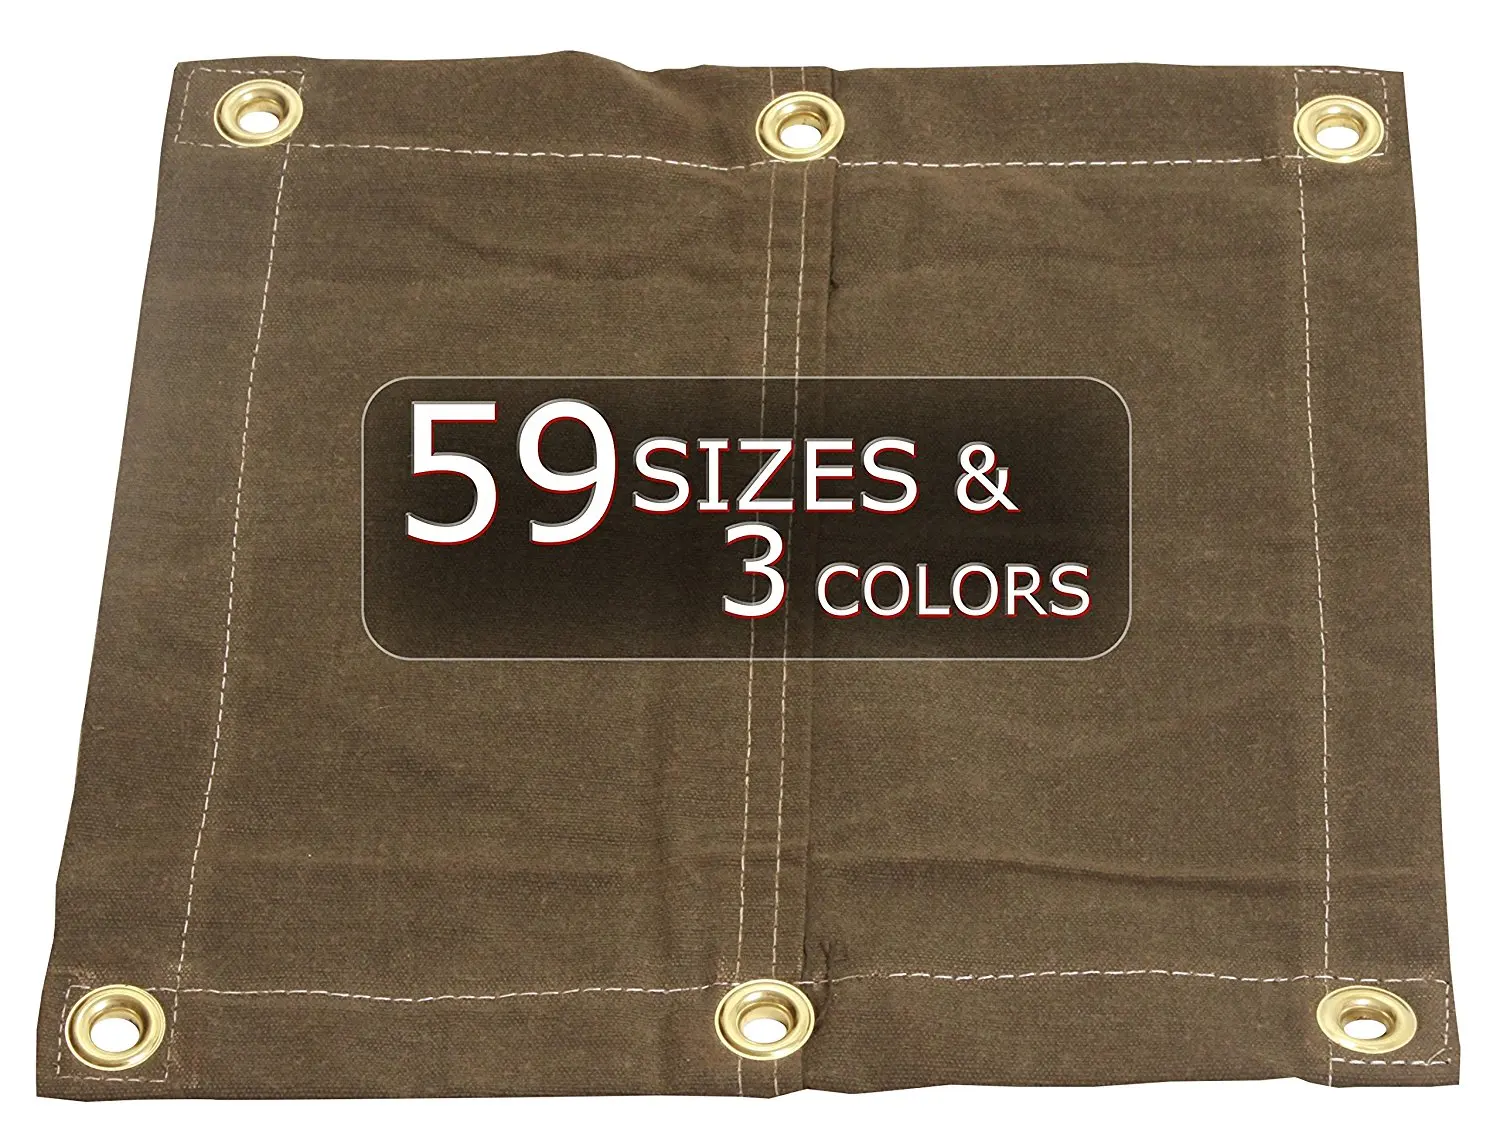 Cheap 10x10 canvas tarp, find 10x10 canvas tarp deals on line at Alibaba.co...